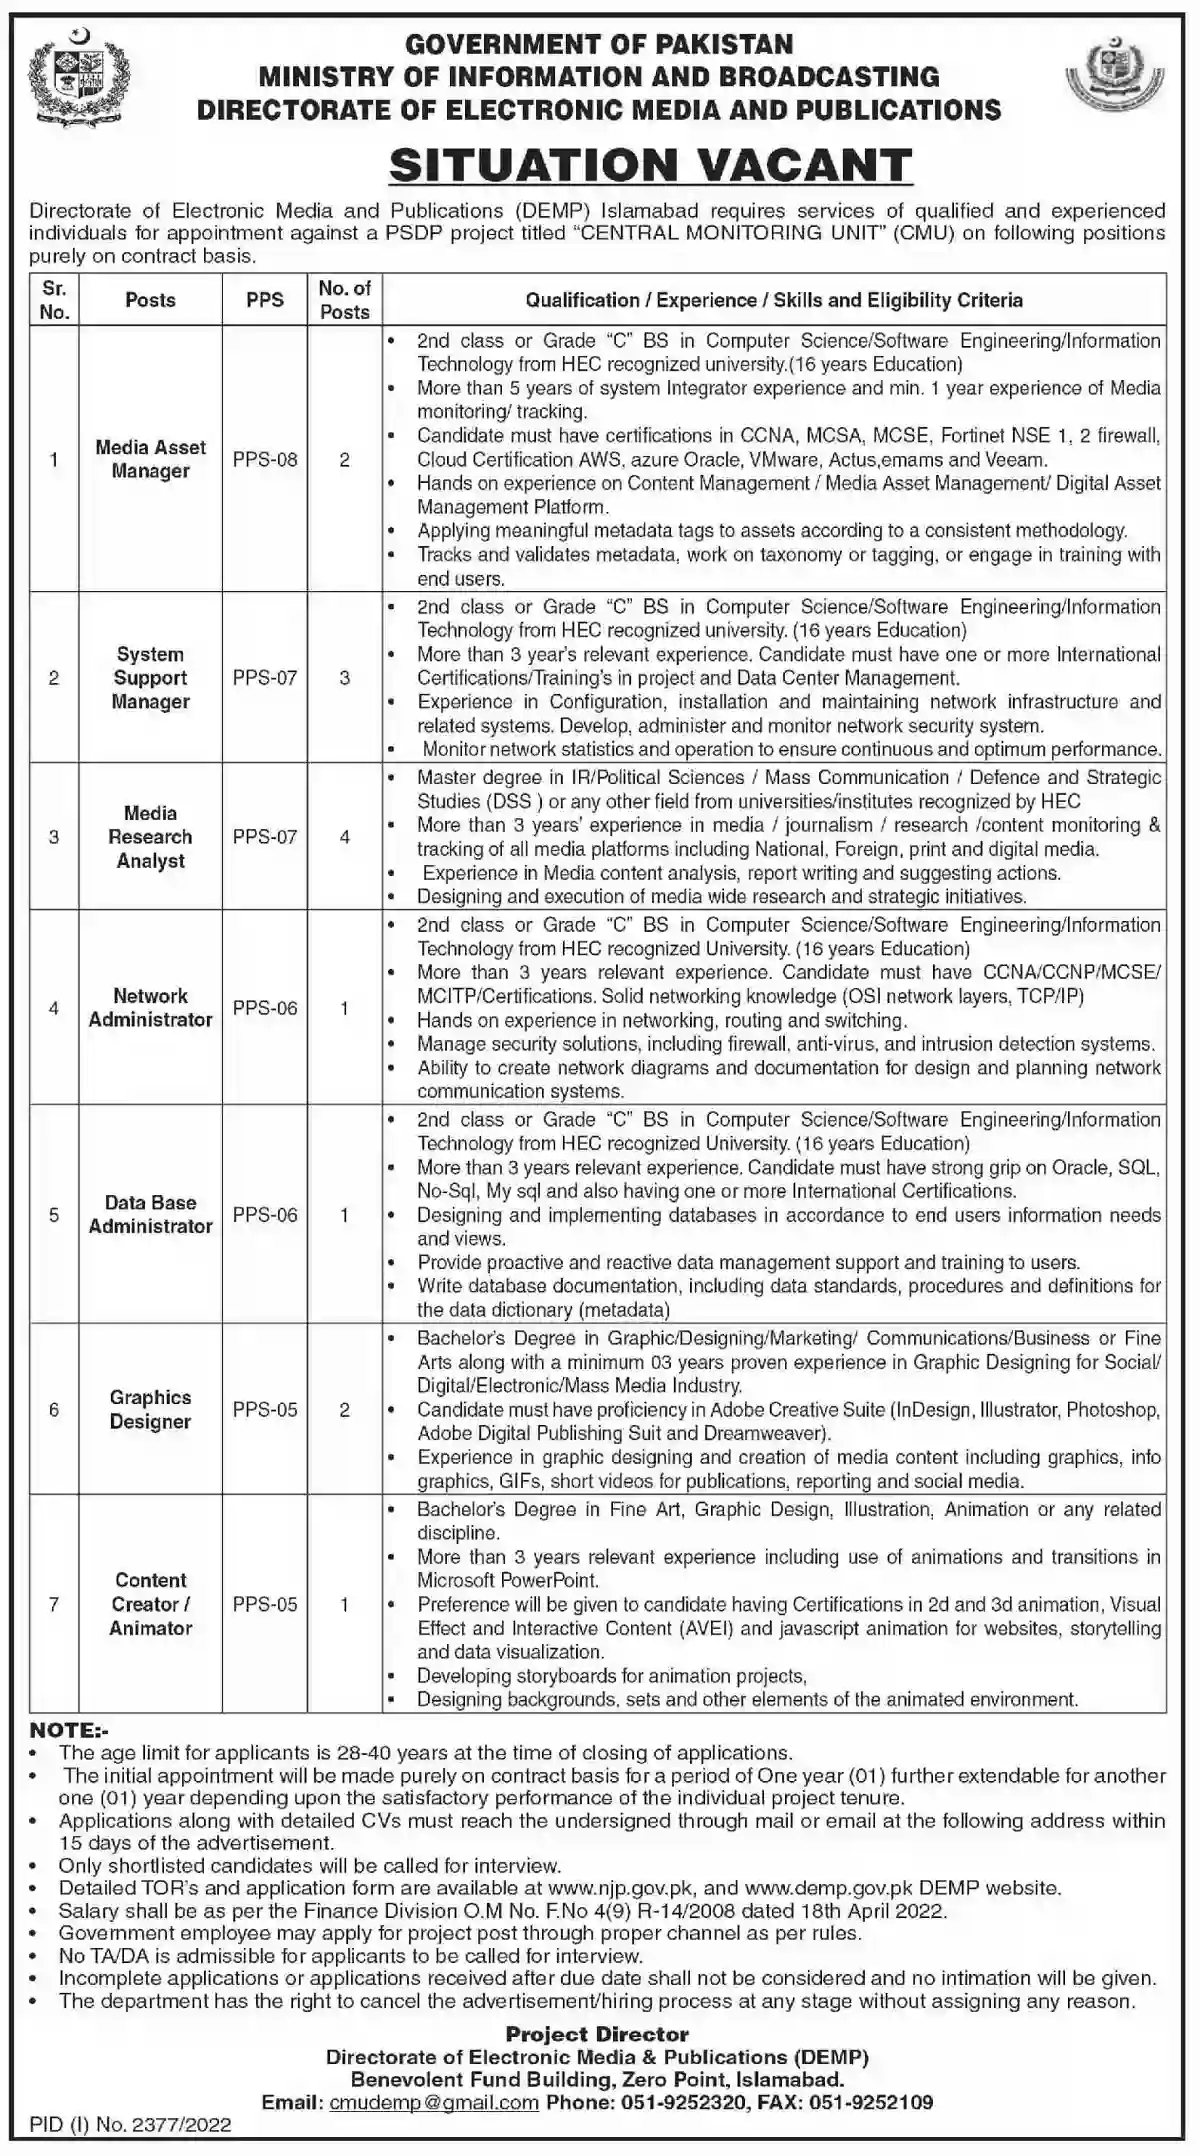 System Support Manager job at MOIB